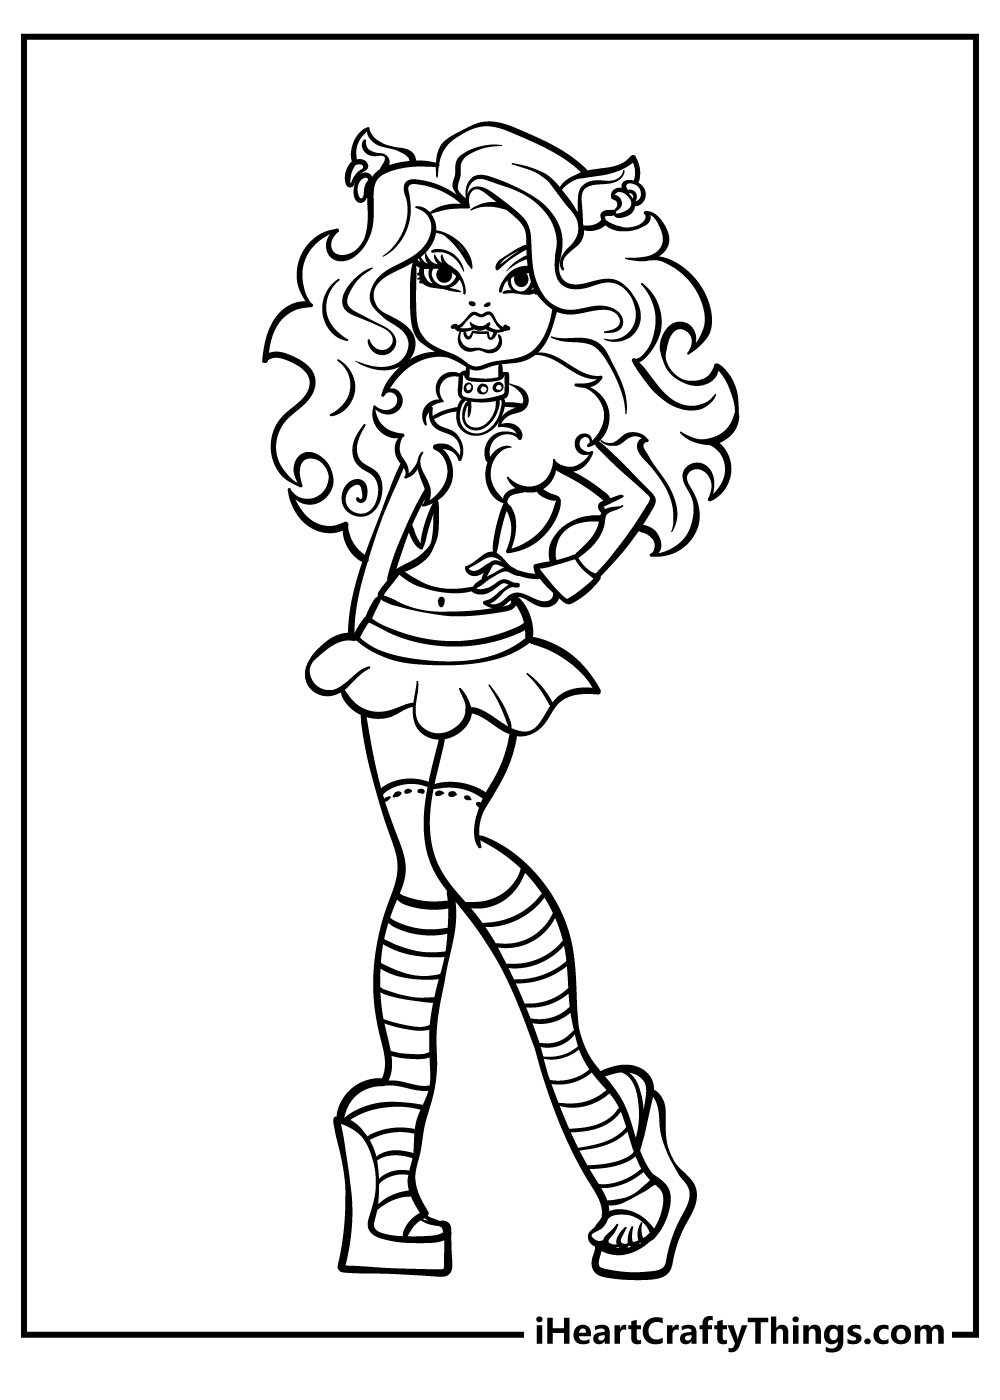 Monster High Coloring Pages for kids free download